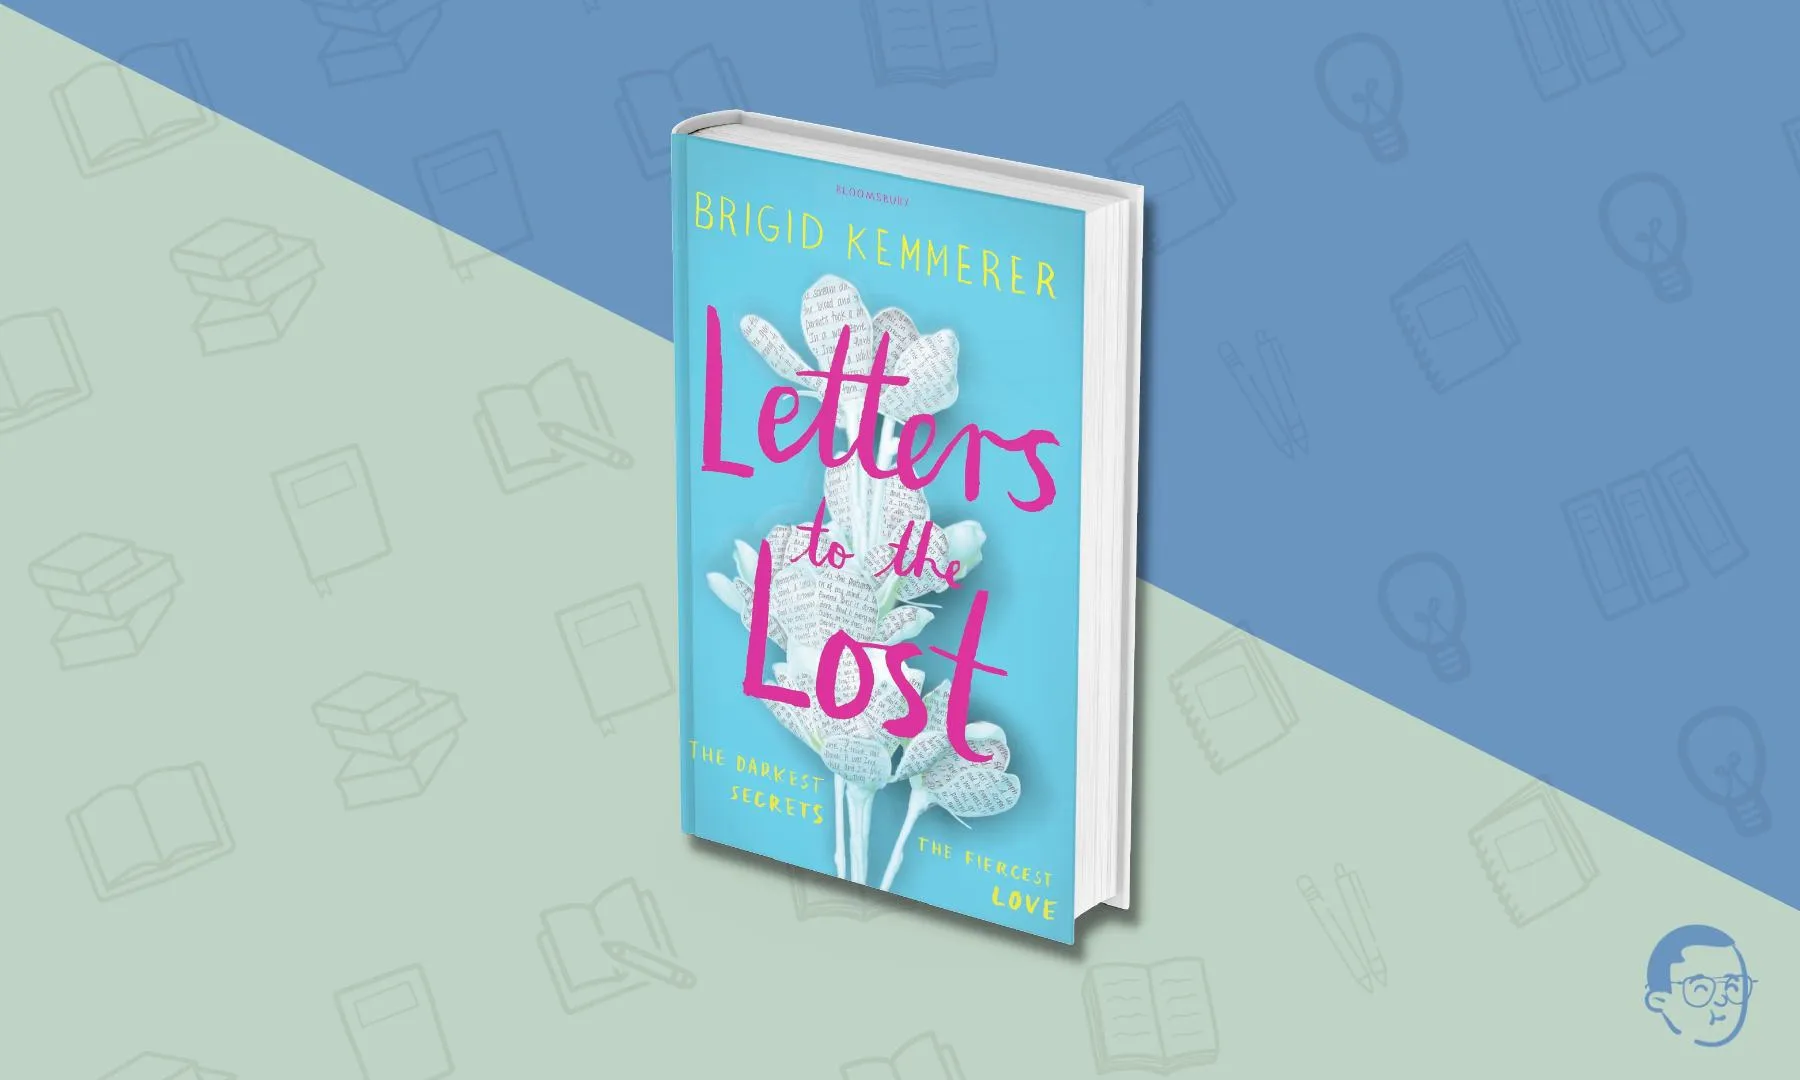 Books Like The Seven Husbands of Evelyn Hugo - Letters to the Lost by Brigid Kemmerer